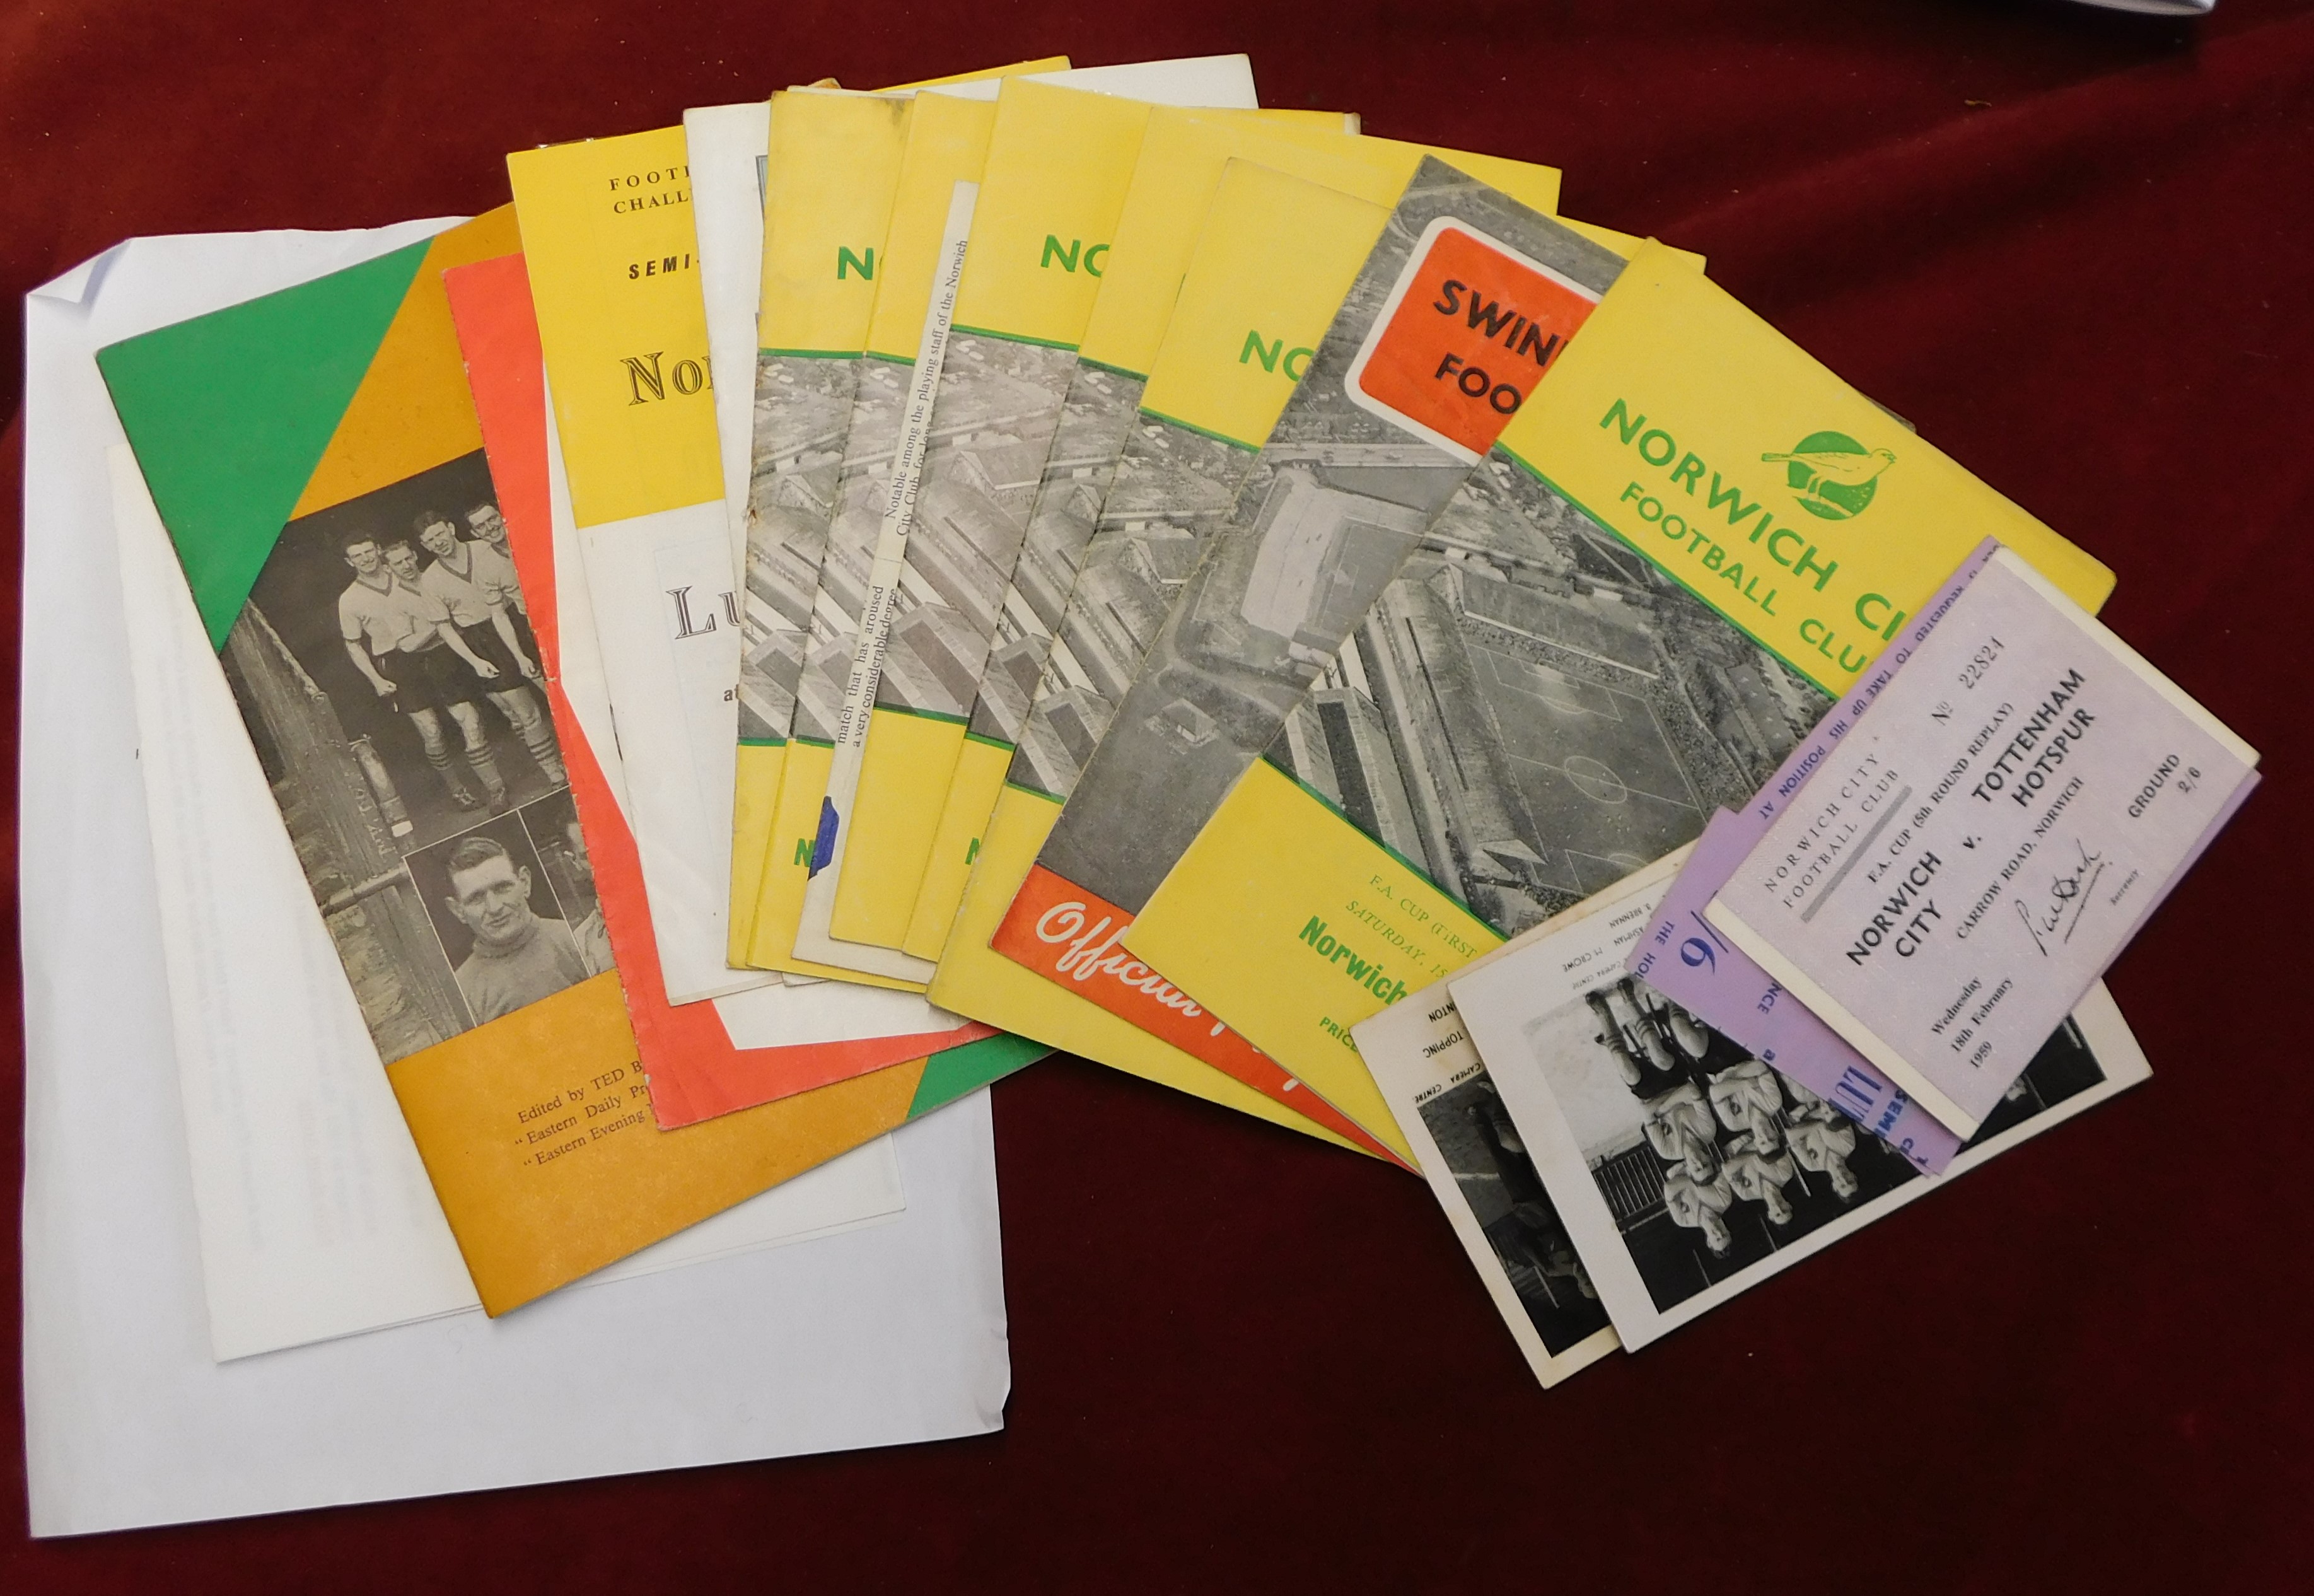 A complete set of 11 programmes (plus 2 tickets and 2 multiple signed postcards) for each of Norwich